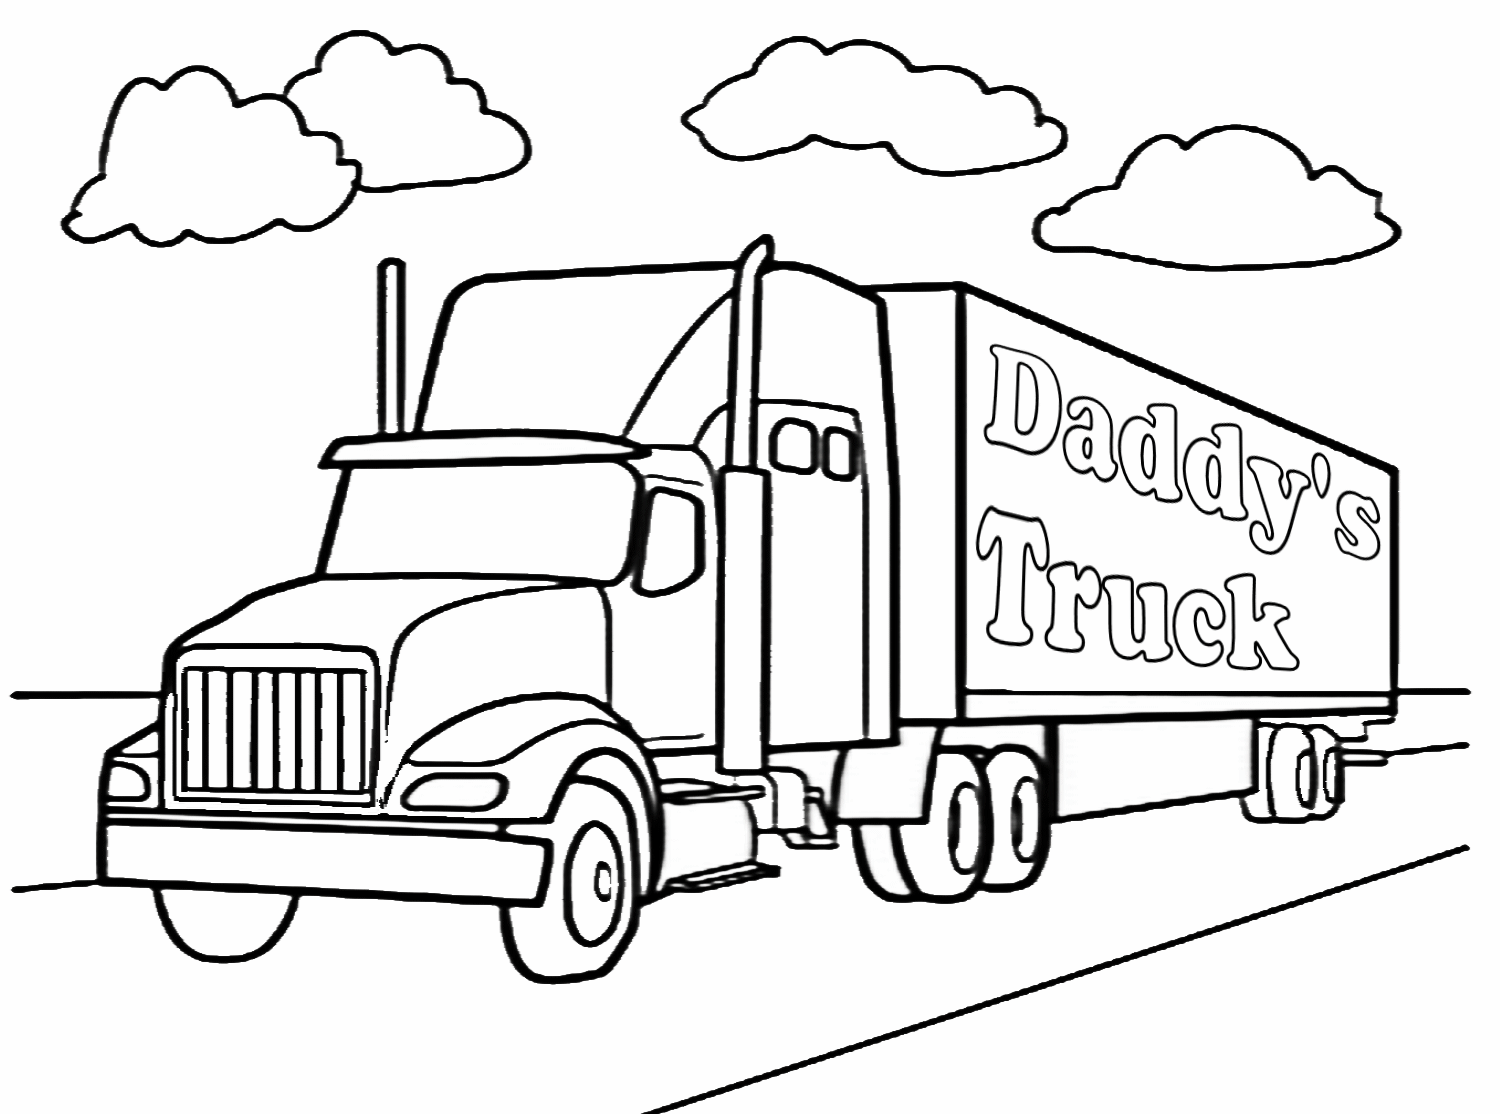 18 Wheeler Coloring Pages Coloring Home